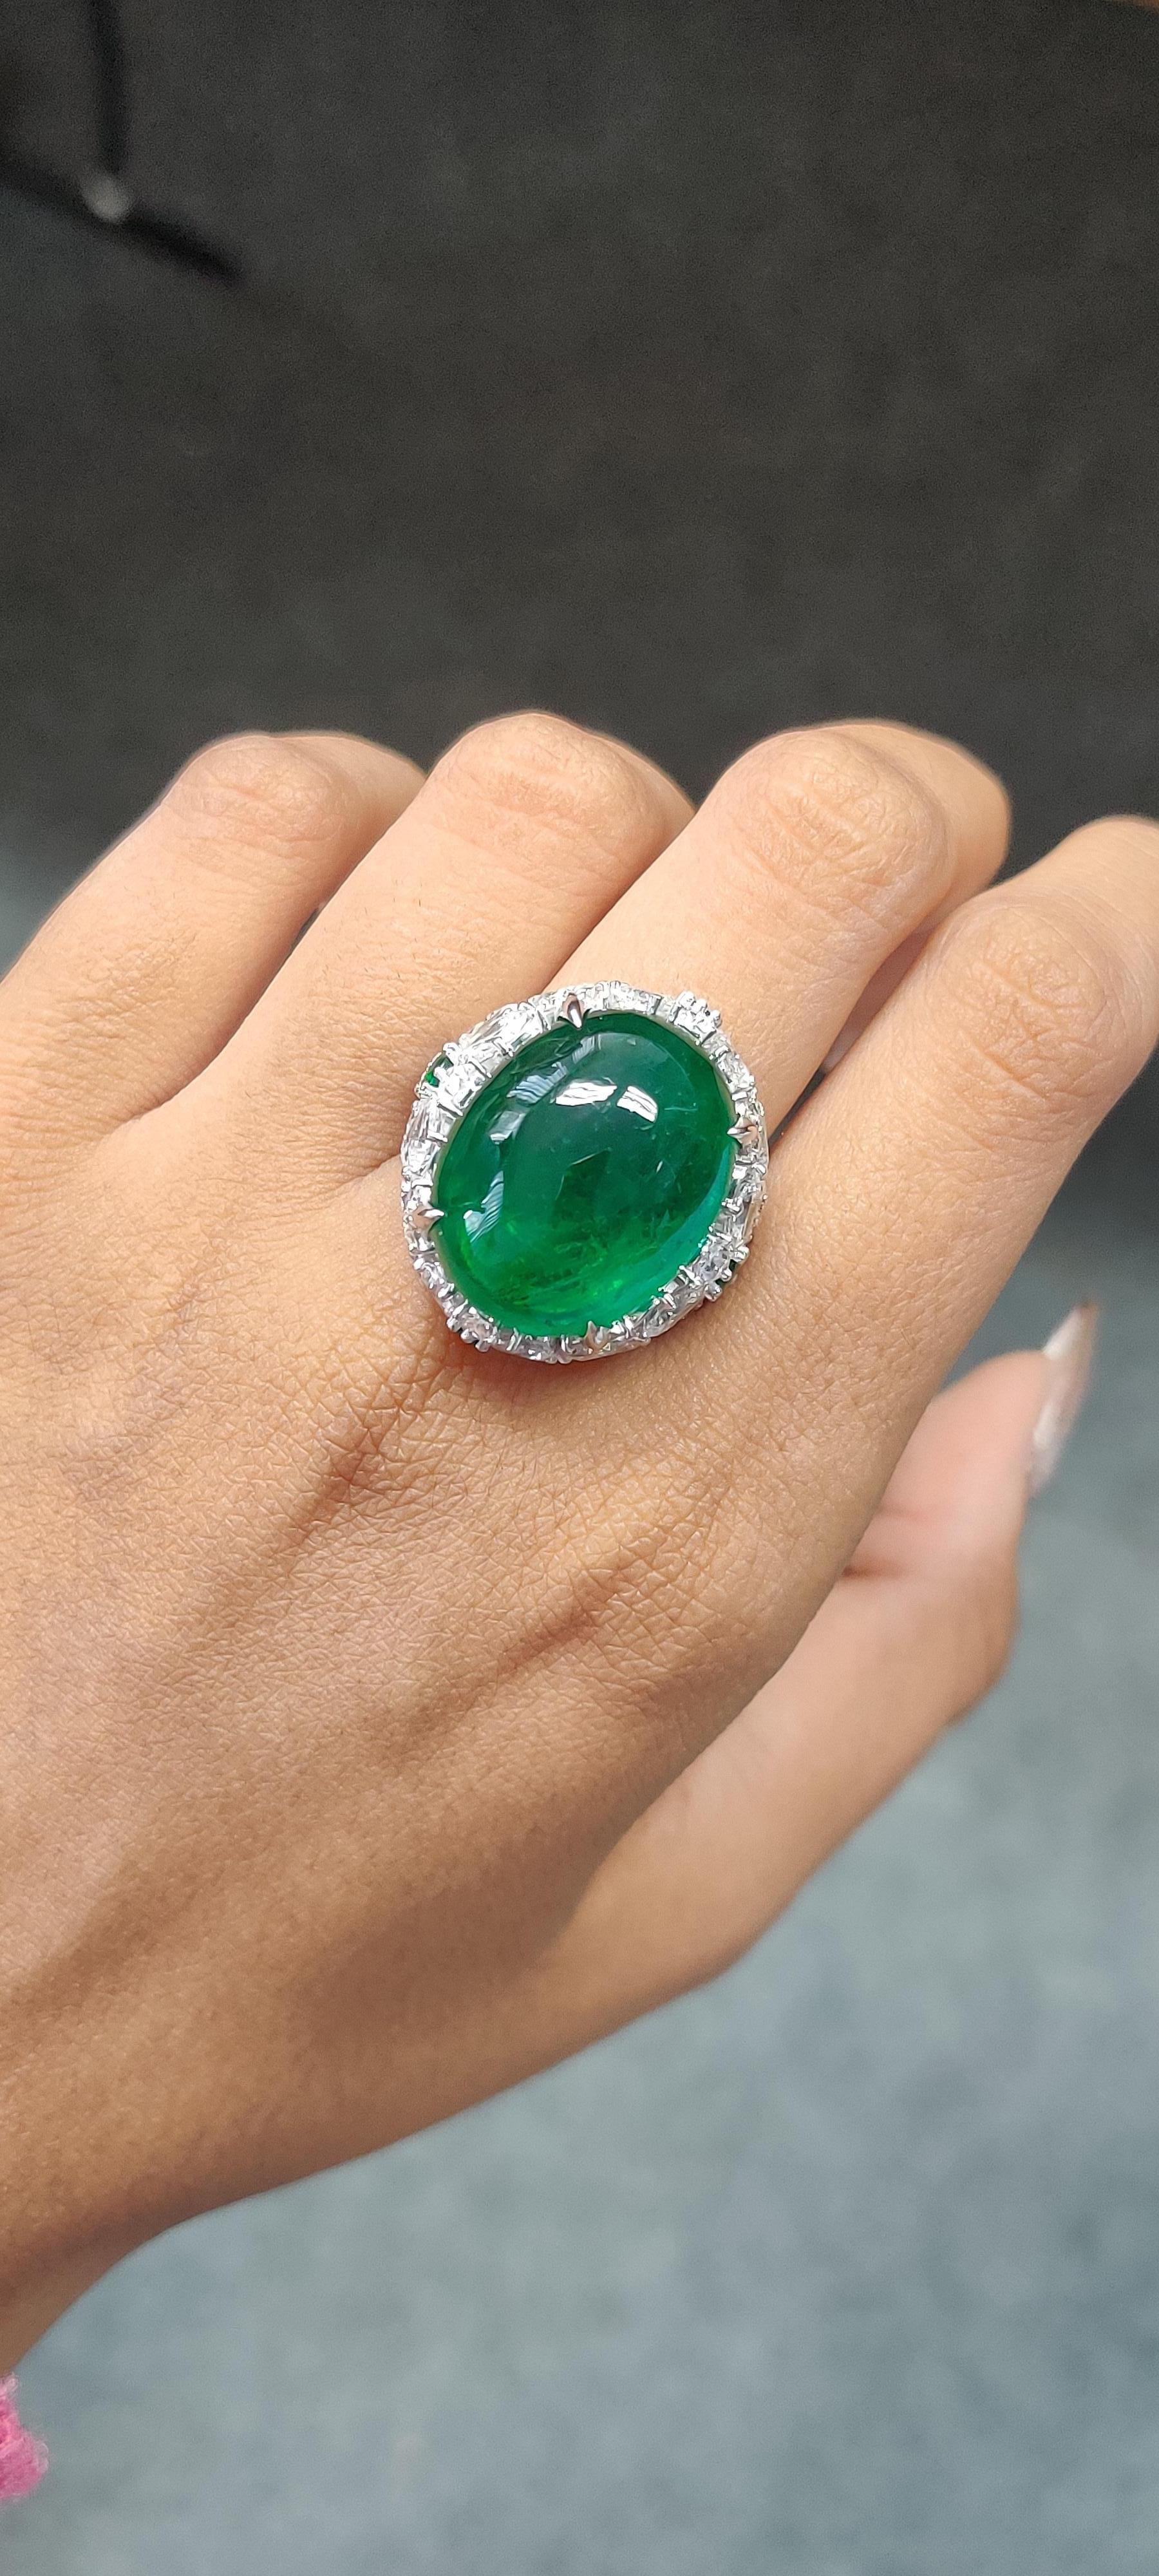 24.60 Carat Cabochon Emerald Art Deco Inspired One-of-a-kind Statement Ring For Sale 1